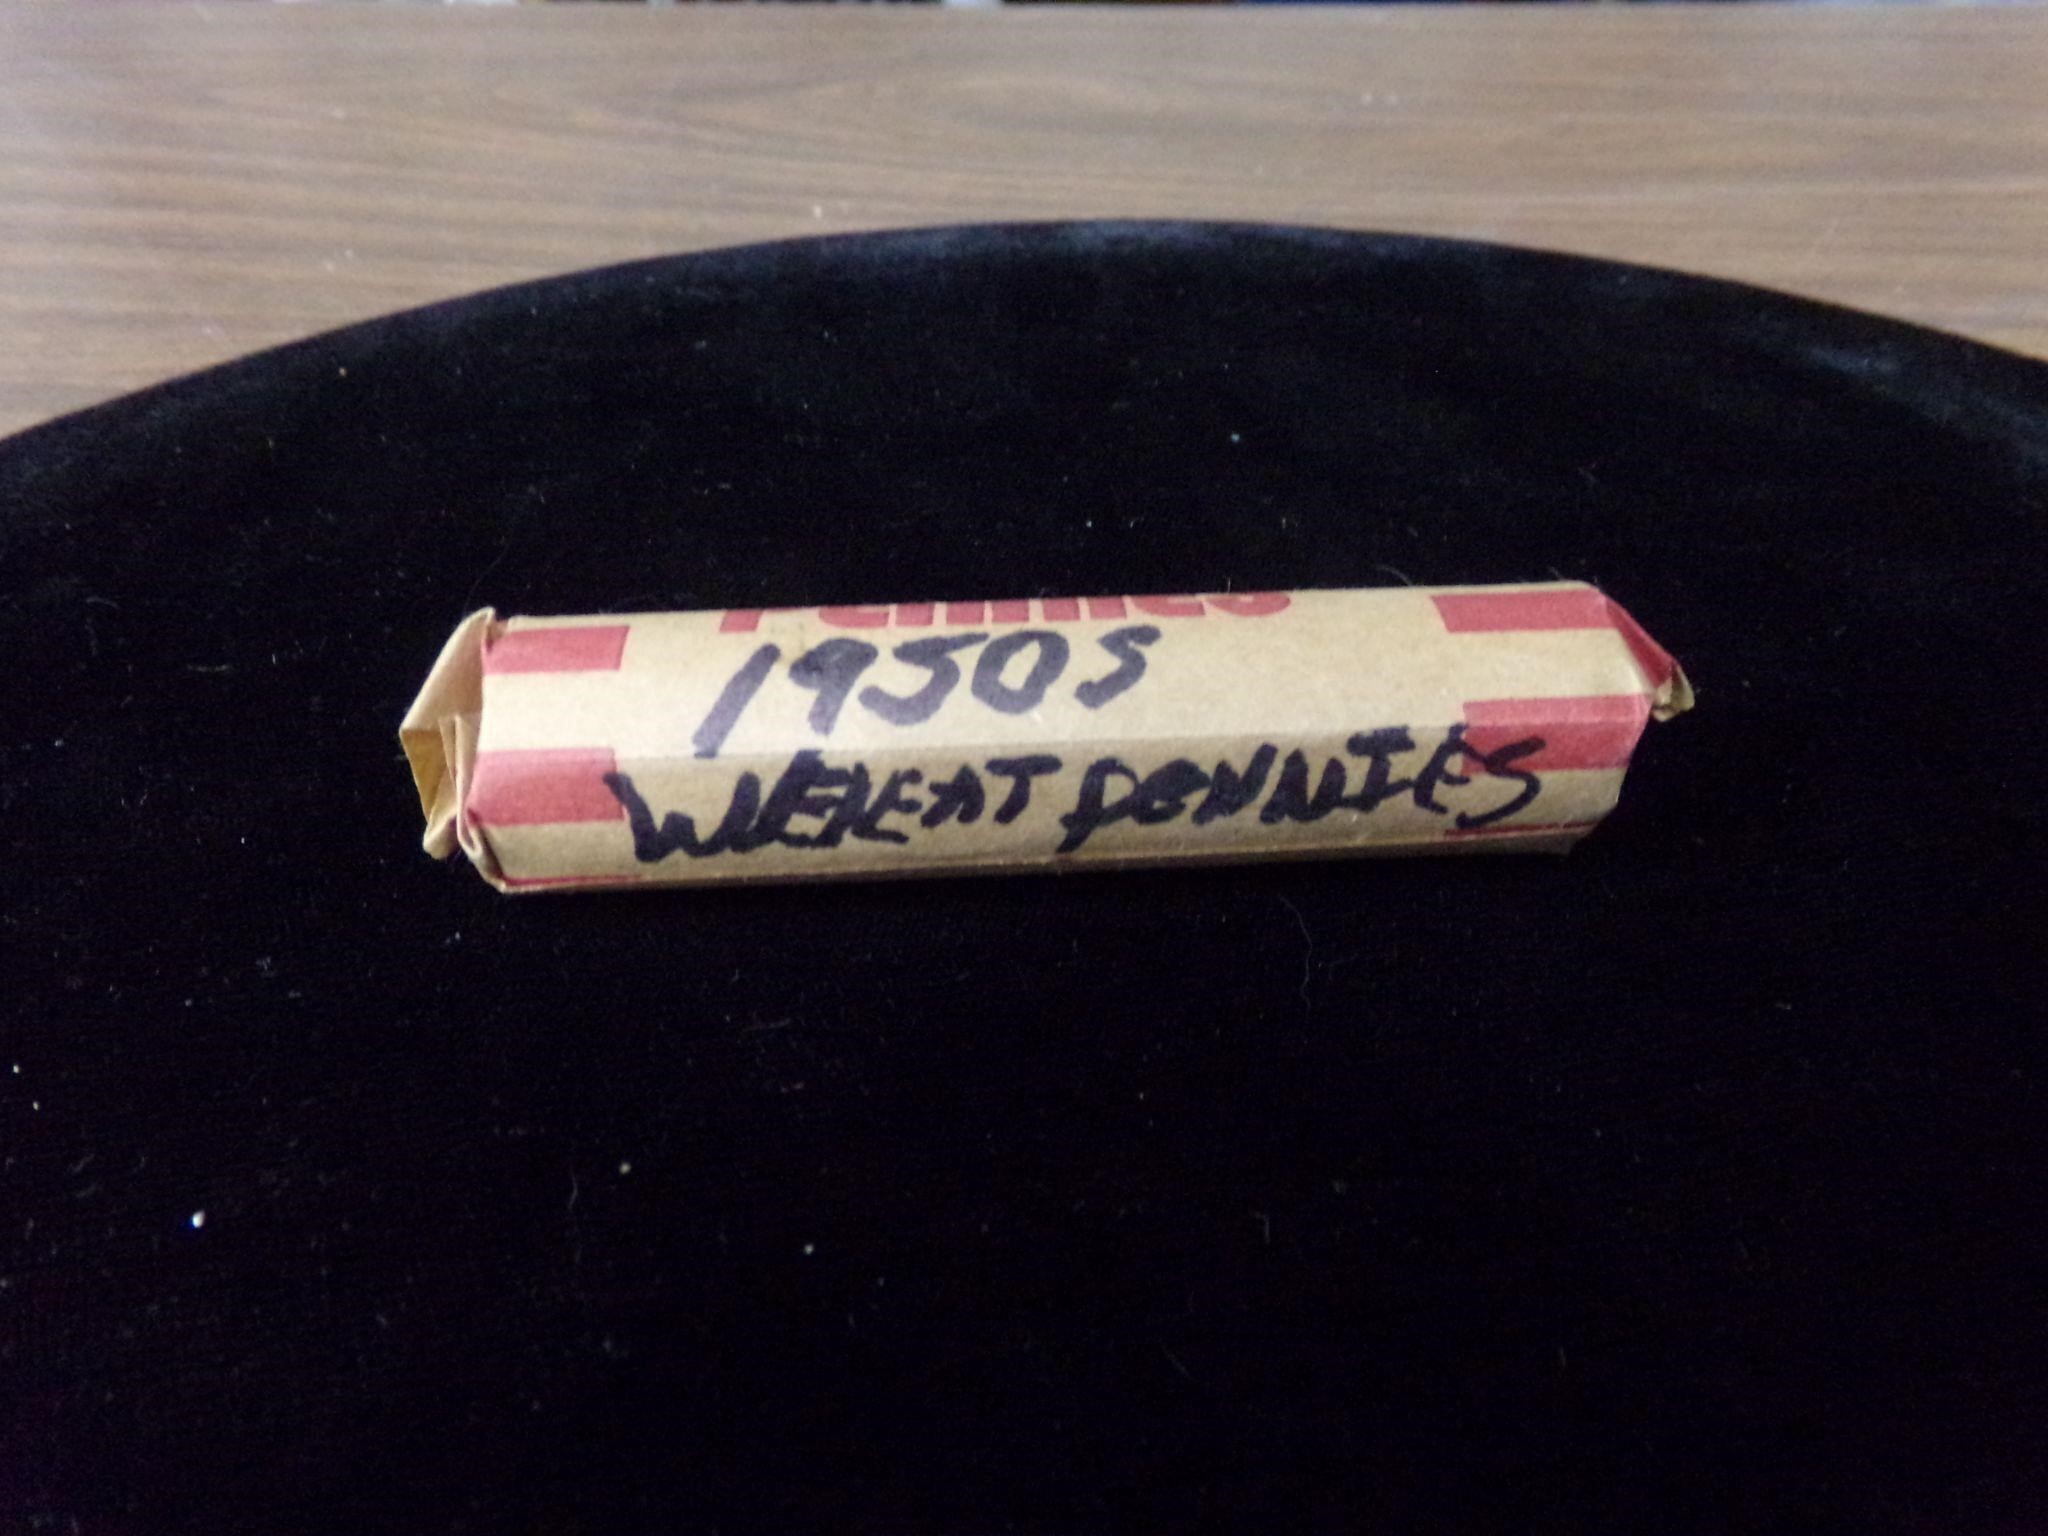 Roll 1950s wheat pennies